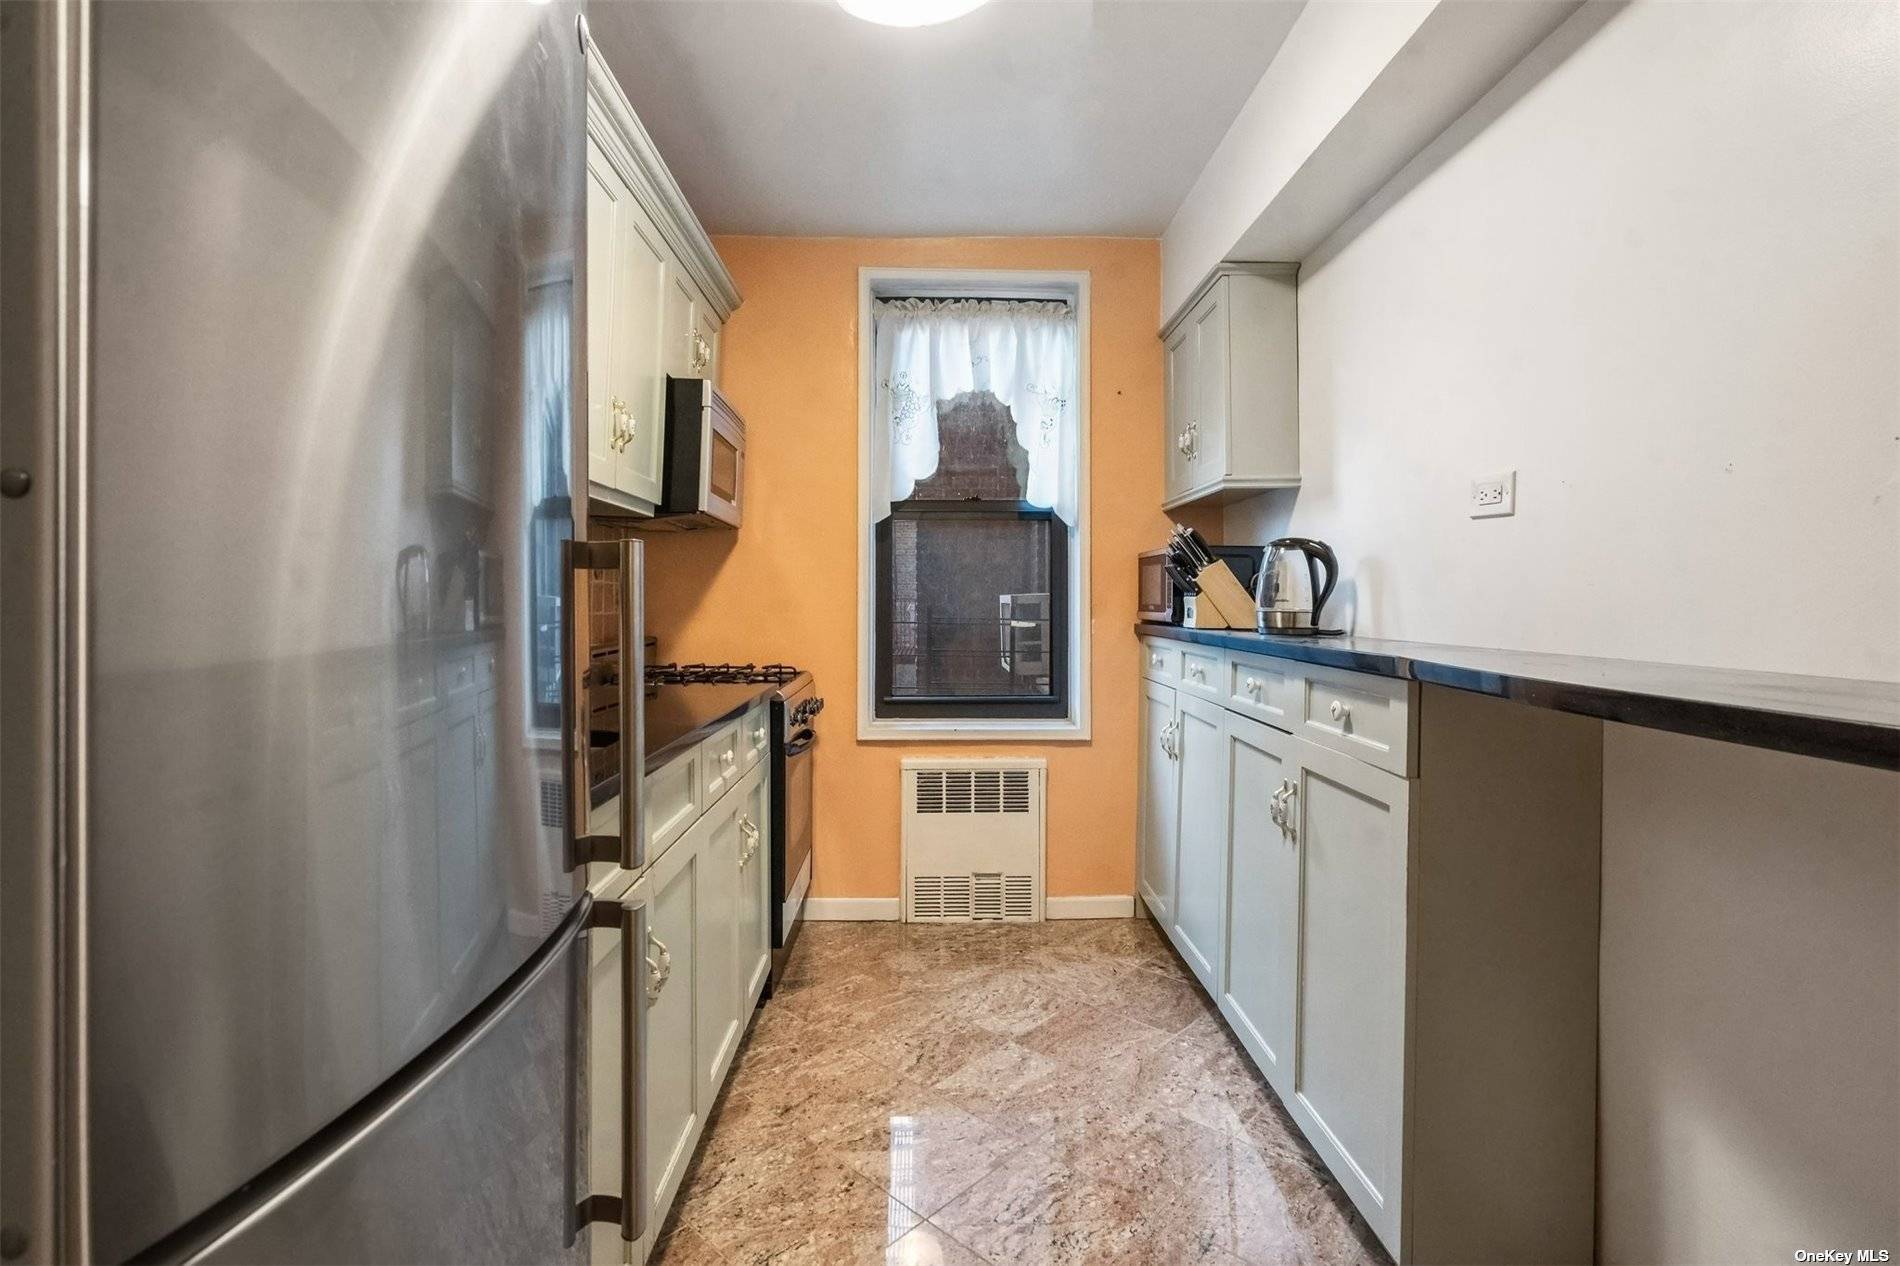 Oversized one bedroom with beautiful hardwood flooring throughout, lots of windows and sunlight.